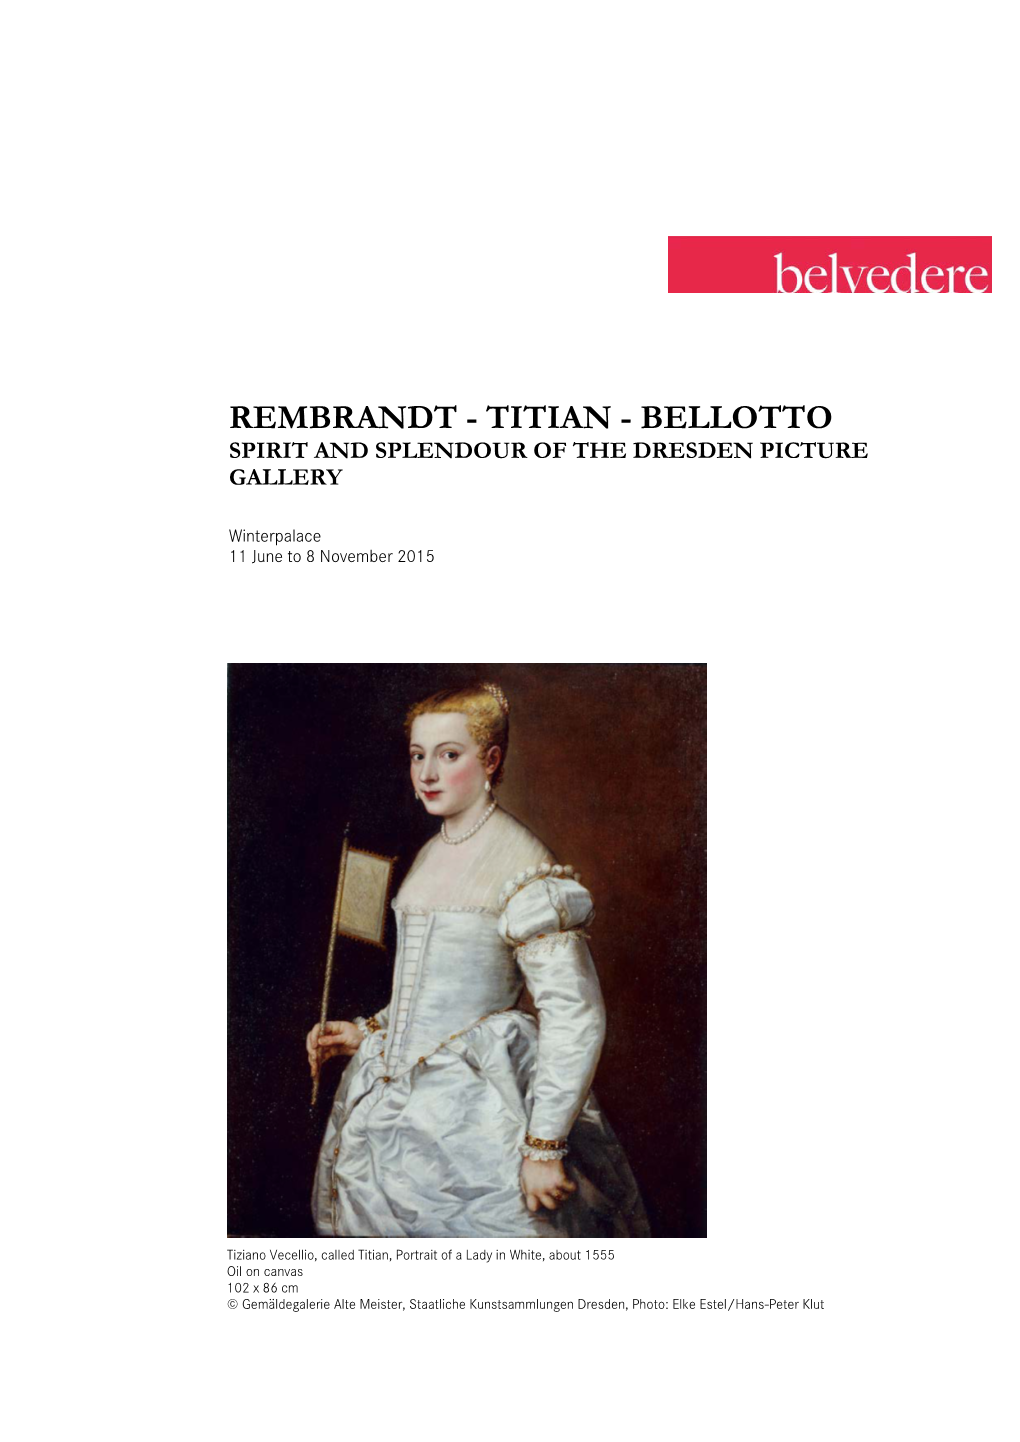 Rembrandt - Titian - Bellotto Spirit and Splendour of the Dresden Picture Gallery